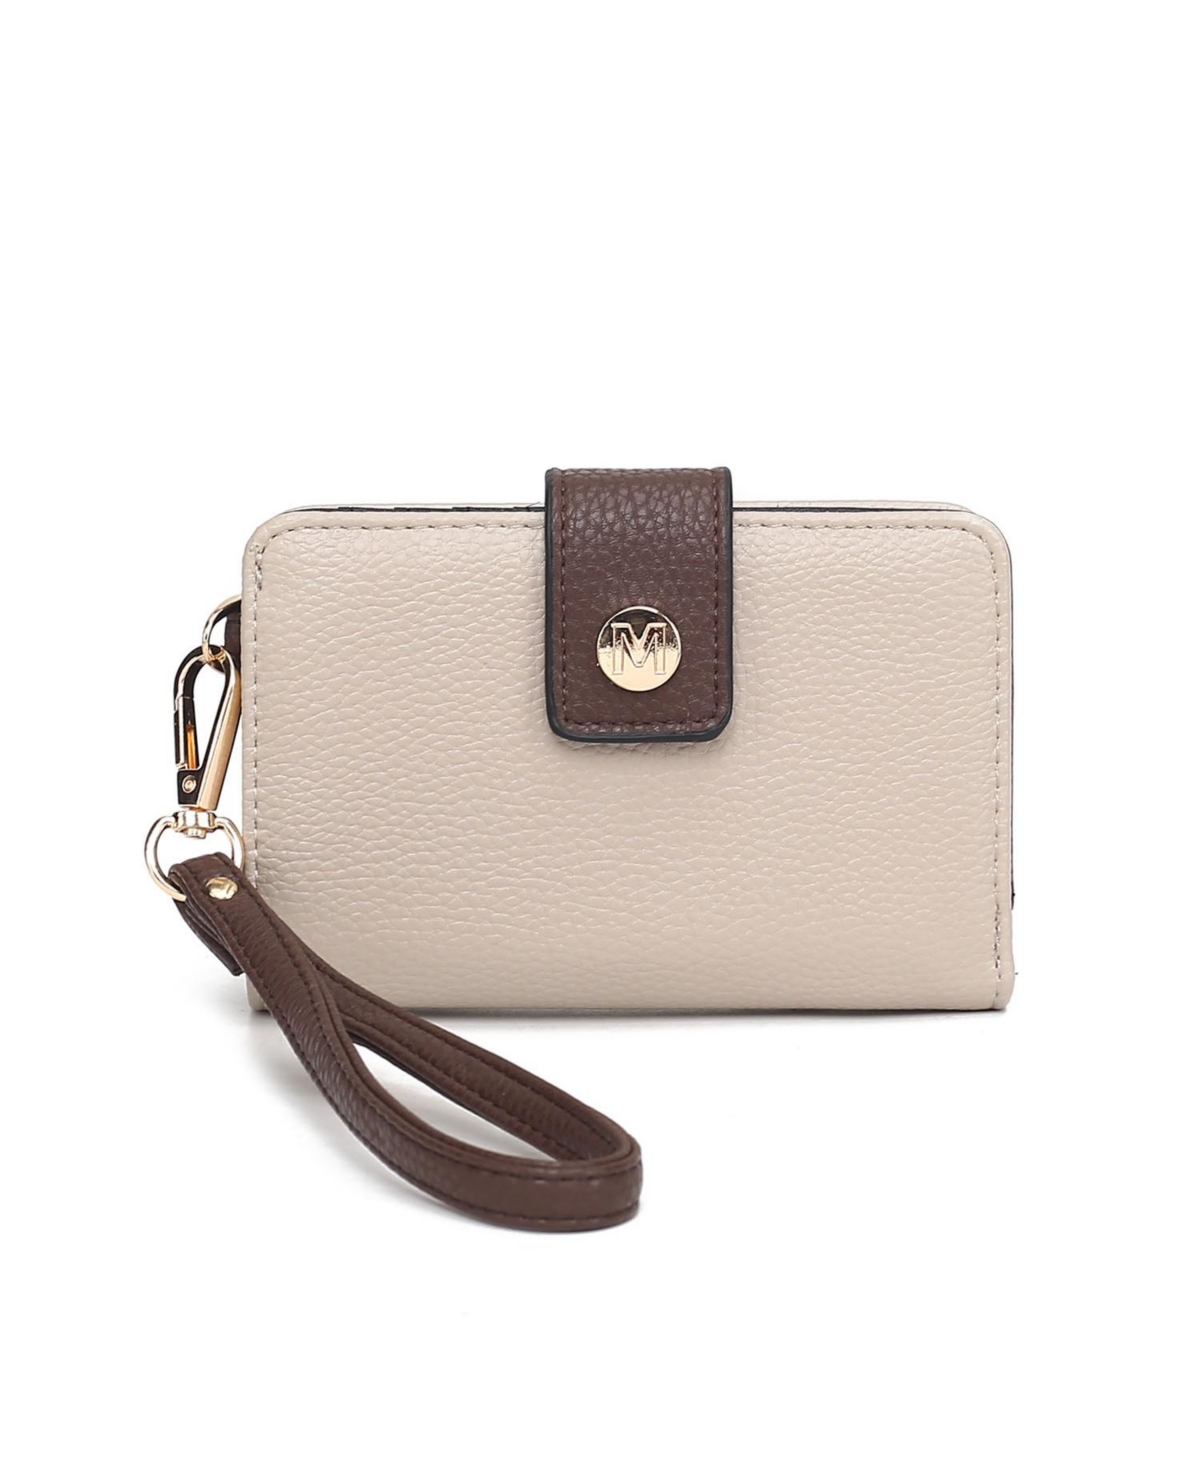 Shira Color Block Women's Wallet with wristlet by Mia K - Taupe